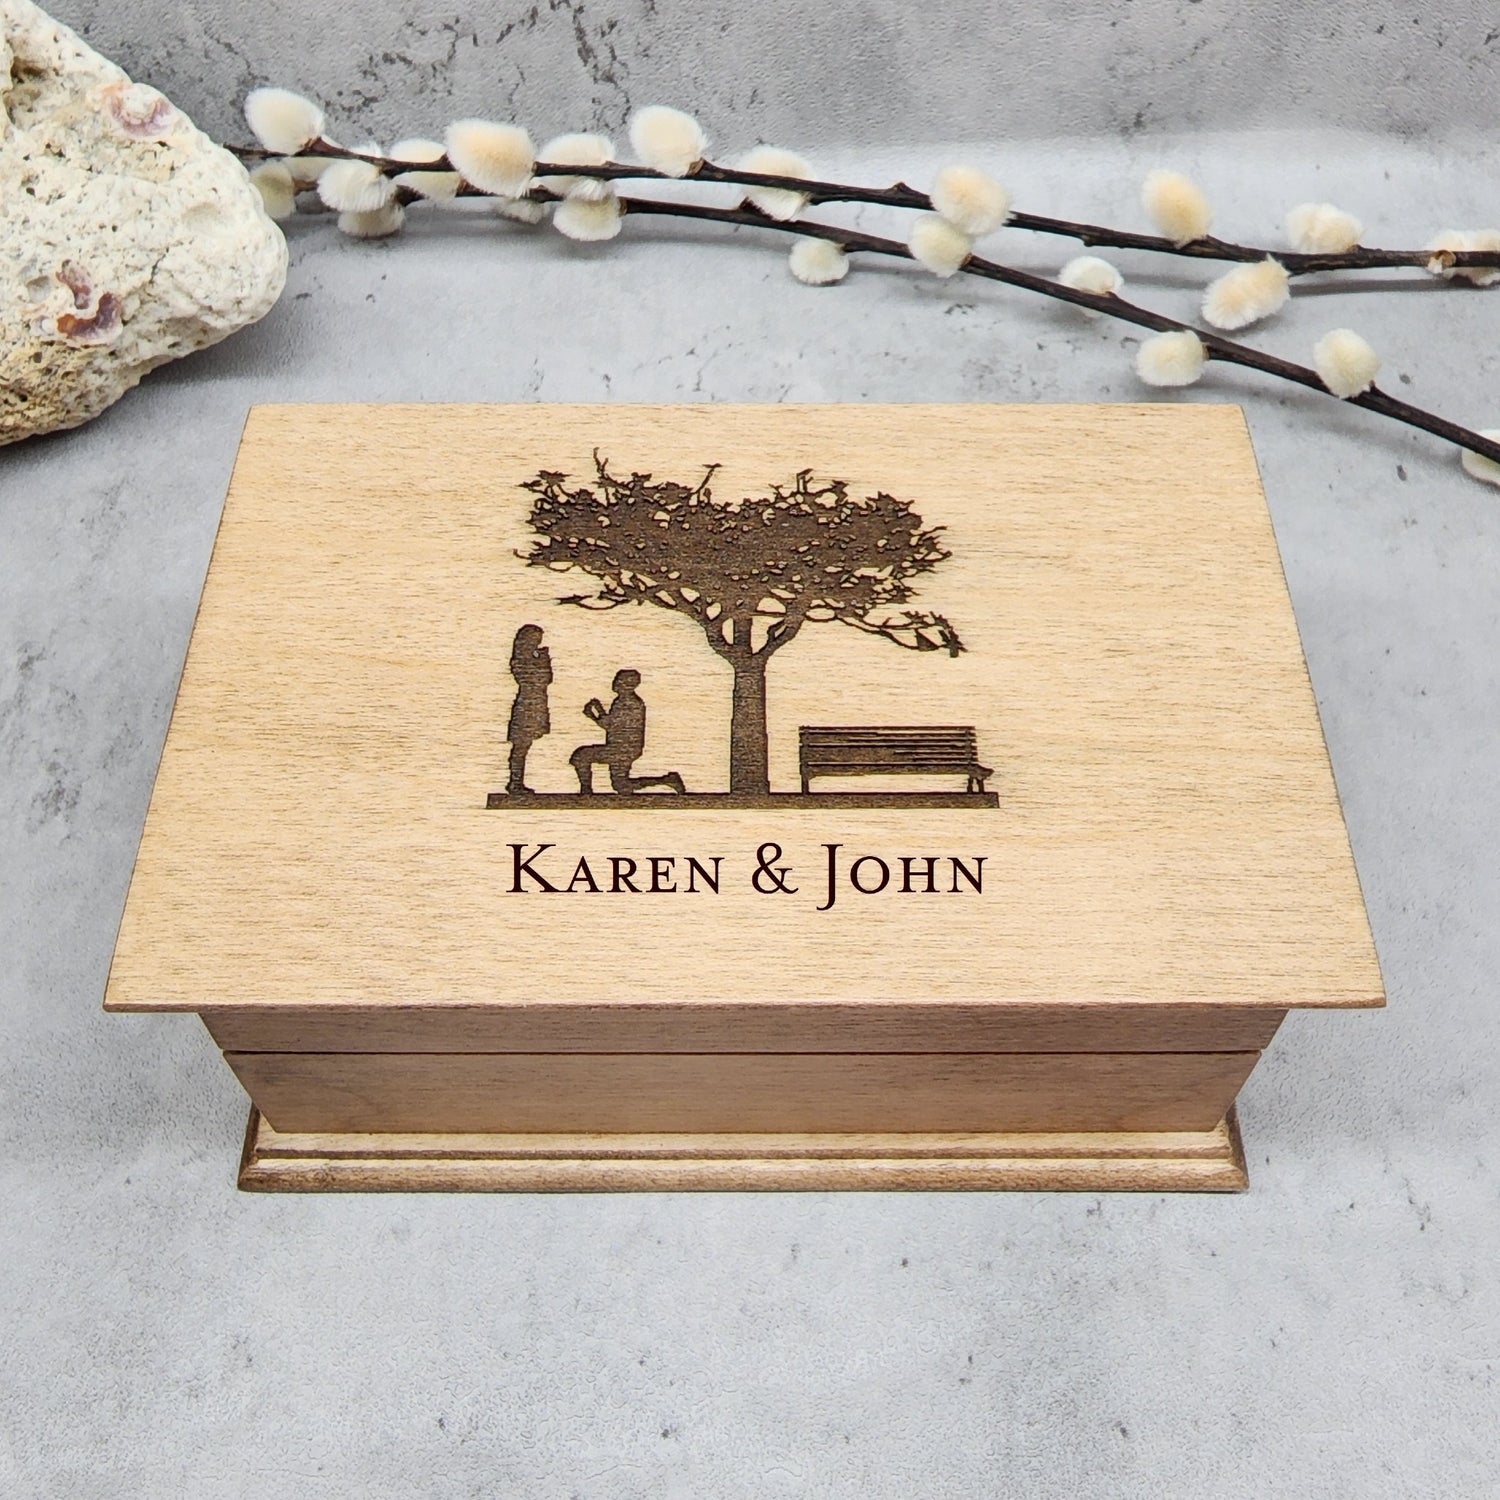 Wooden jewelry box engraved with a tree, a bench and a man on his knees going to propose and a girl, with your names under the image, choose your song and color